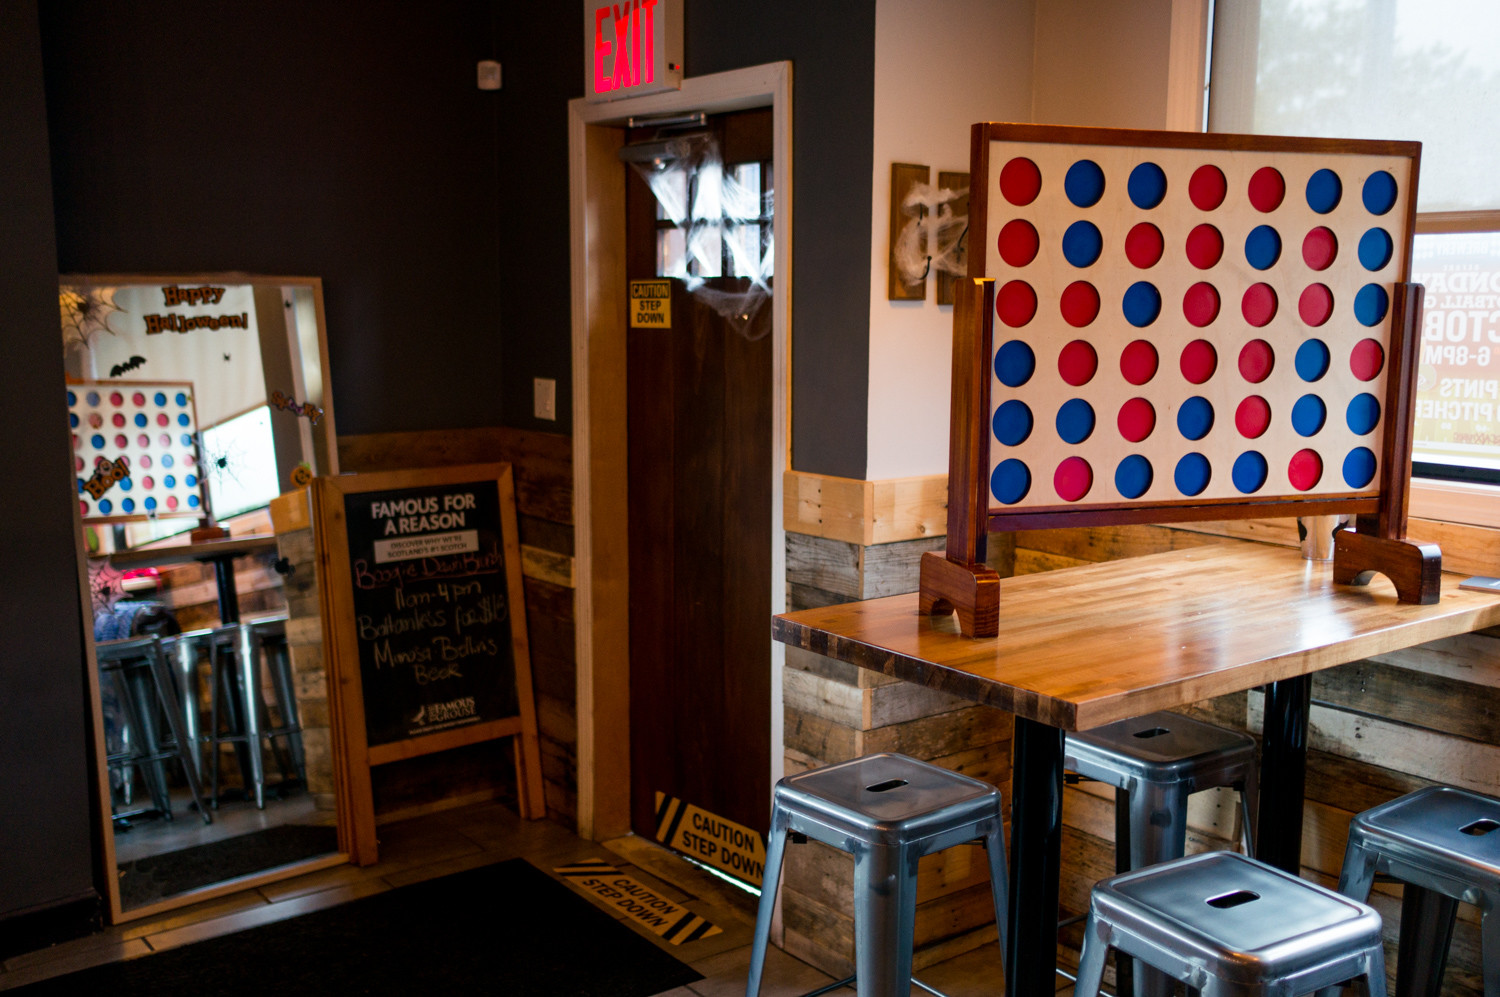 The Bronx Public has a big version of Connect Four for customers to play, something that can engage college-aged patrons and millennials.